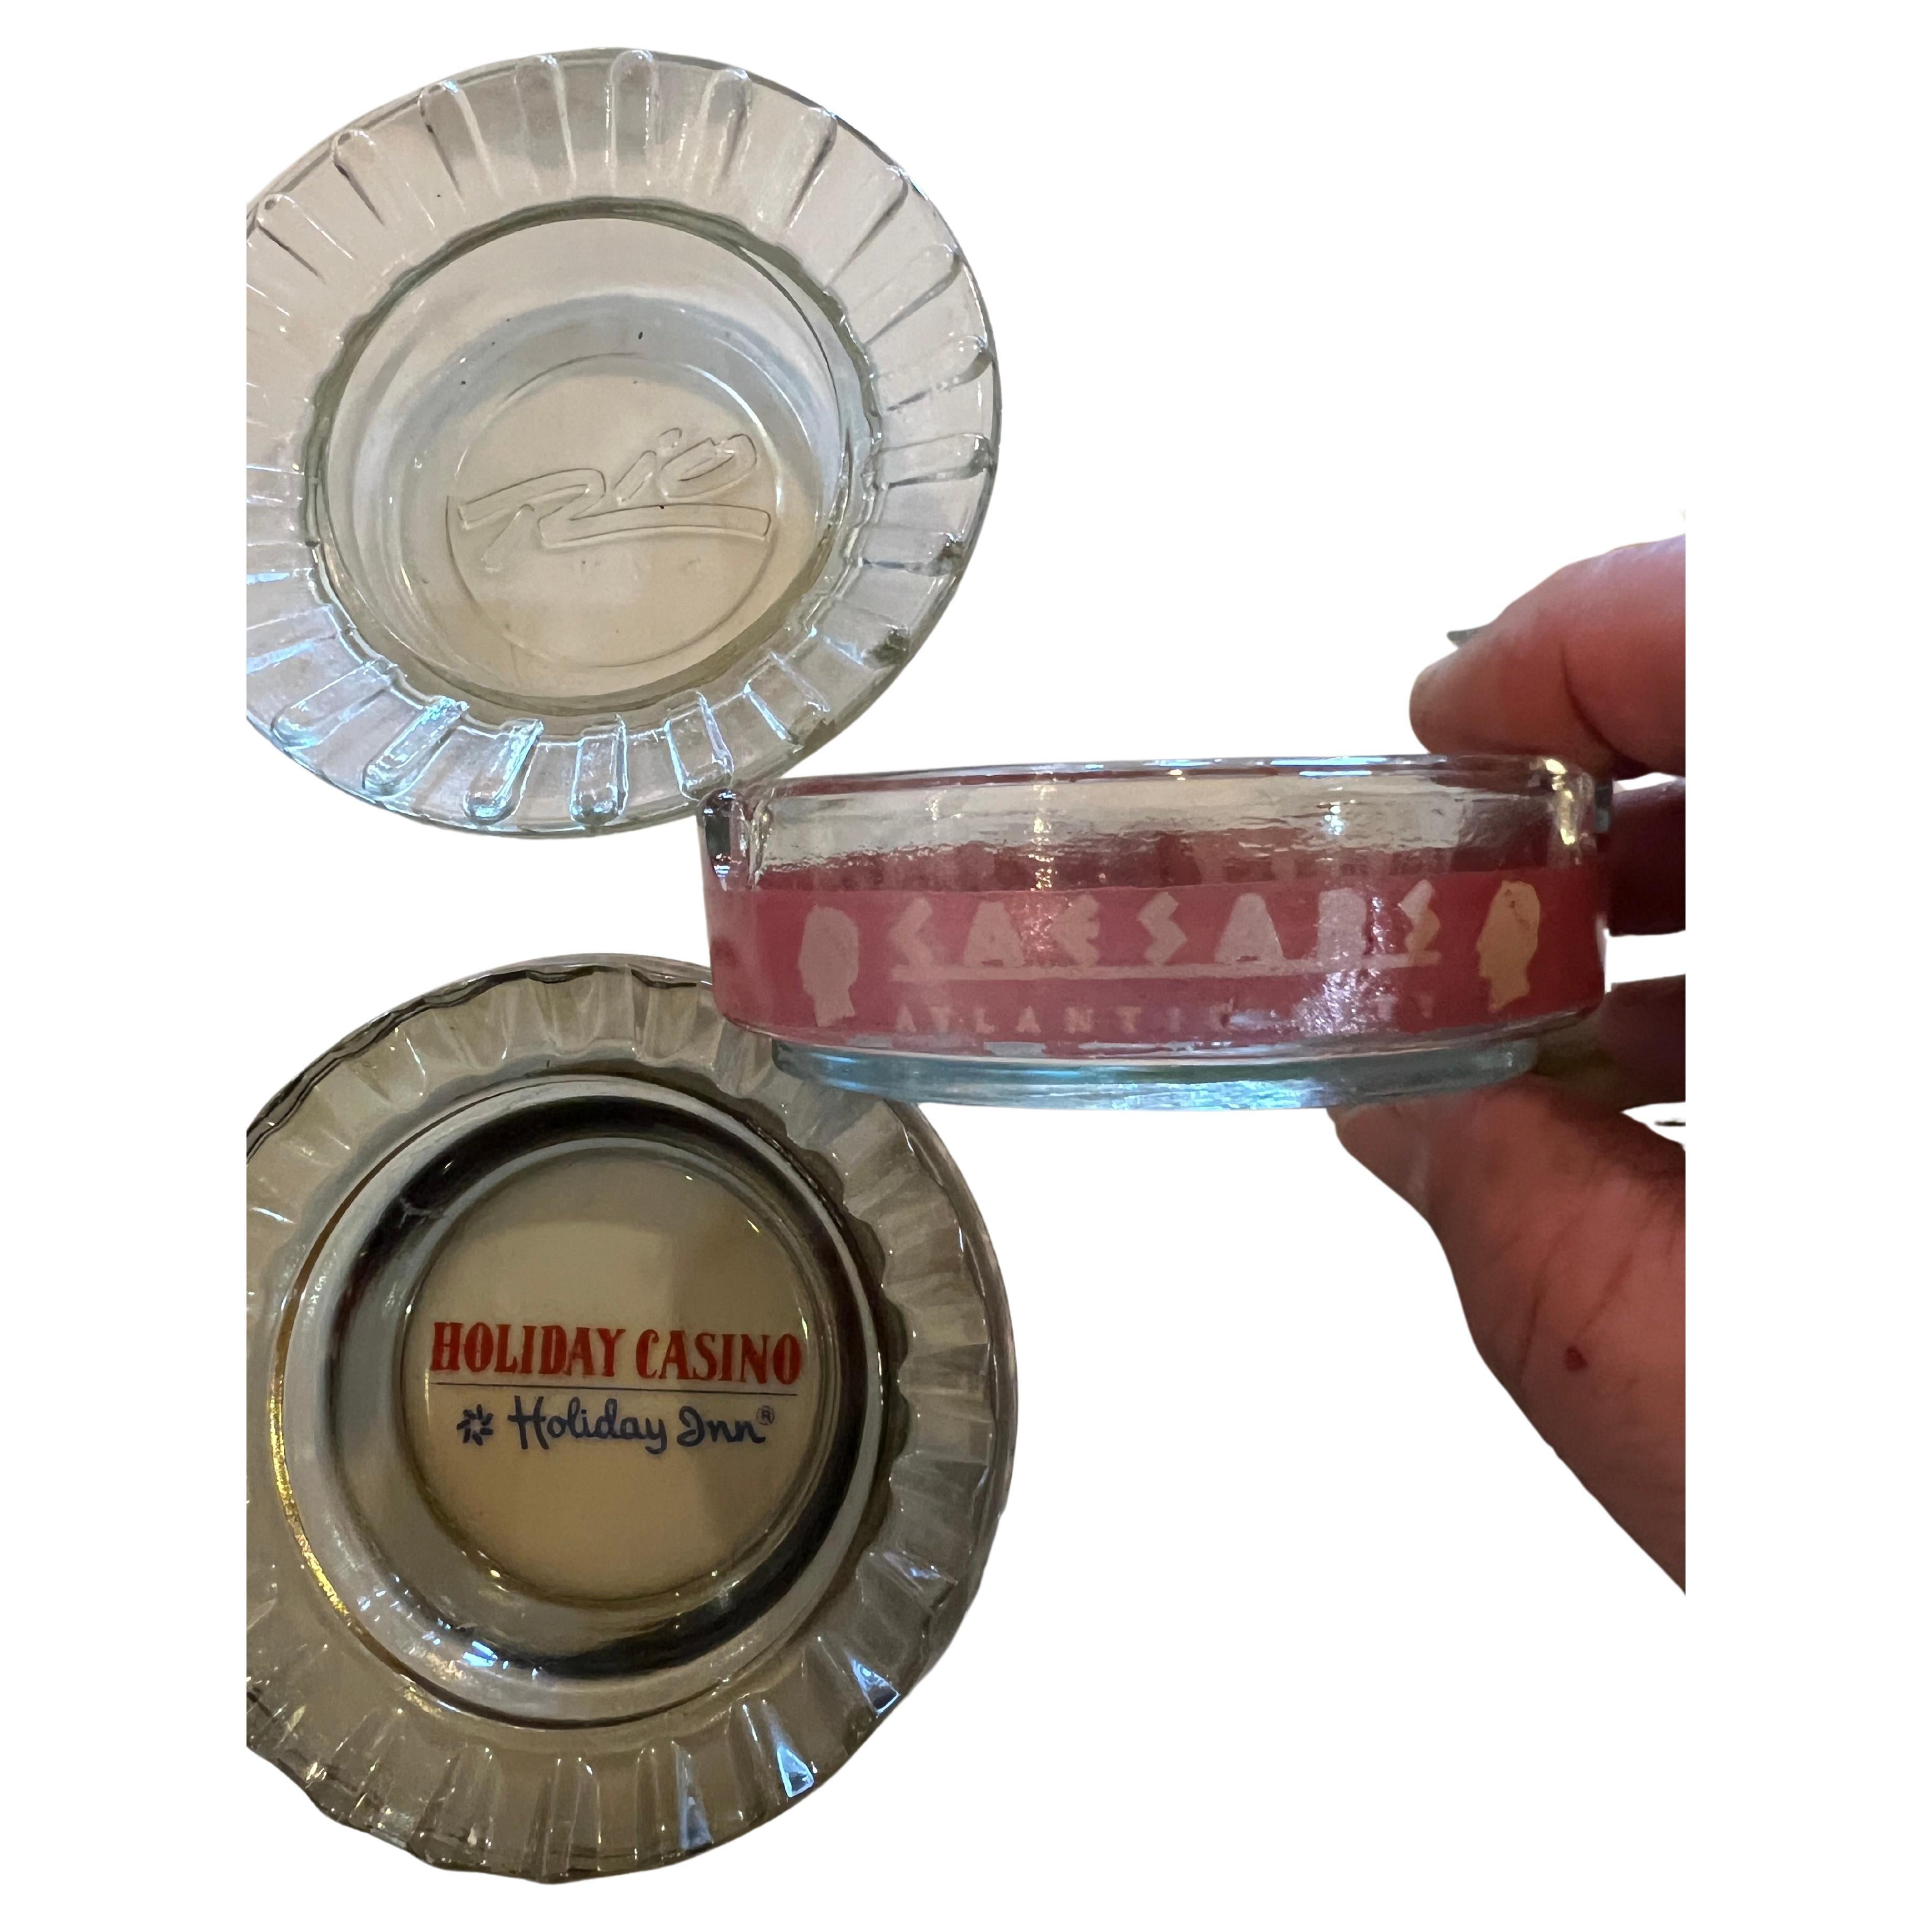 A very cool collection of eleven glass vintage Las Vegas casino ashtrays circa 1970s. All of the ashtrays are in very good vintage condition with no chips or cracks and clear, crisp graphics. On average, they measure 4